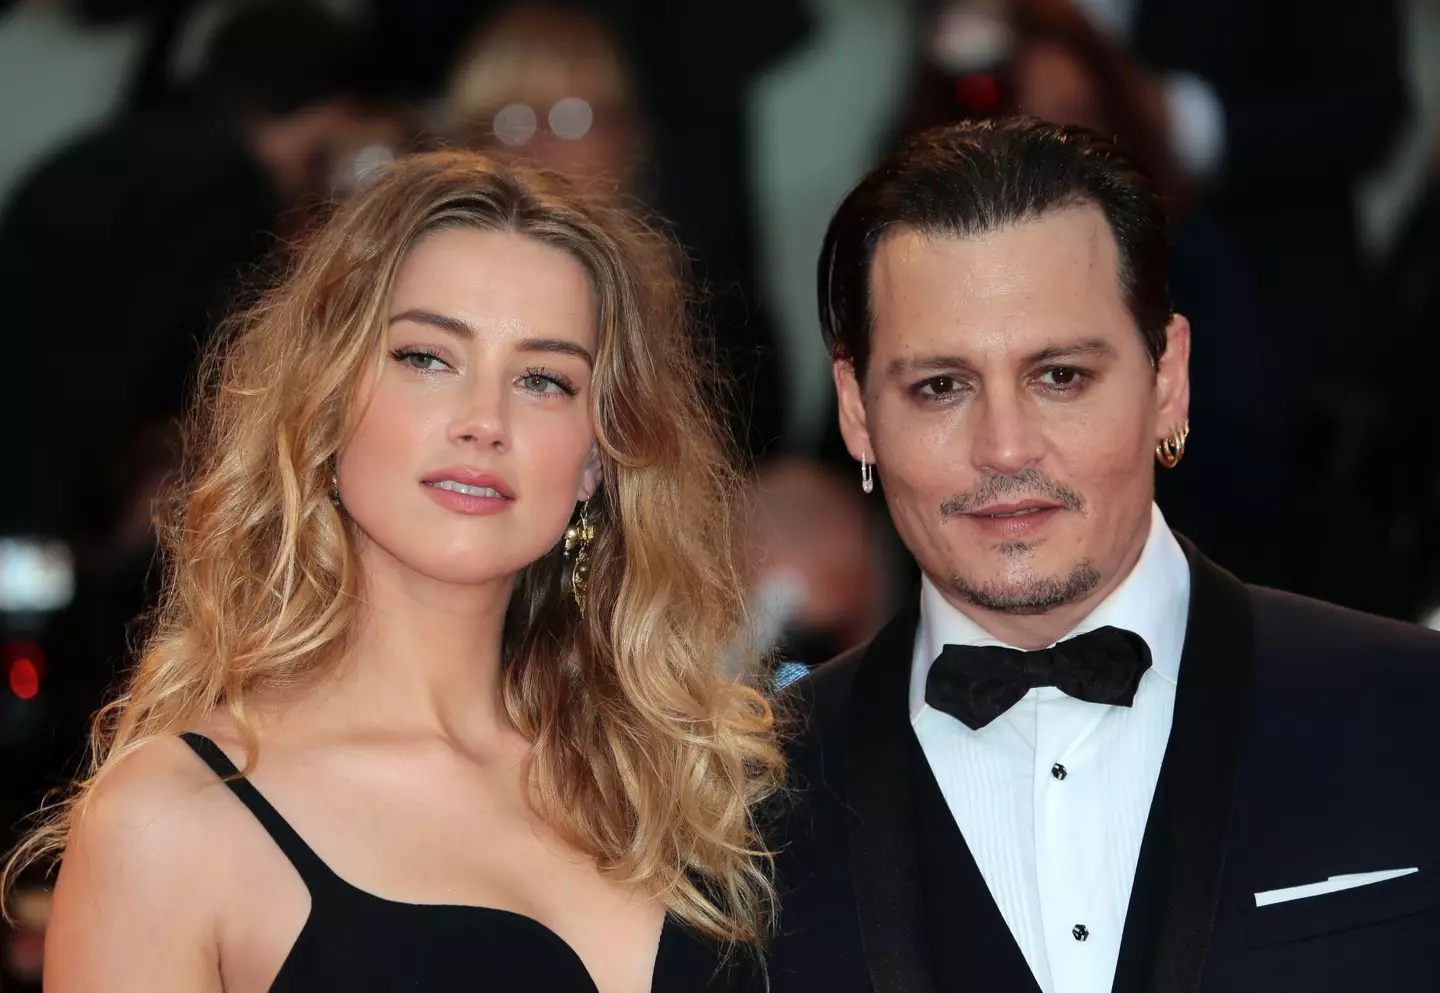 Amber Heard will be able to use an anti-Strategic Lawsuit Against Public Participation in her defence in the defamation lawsuit between her and Johnny Depp.